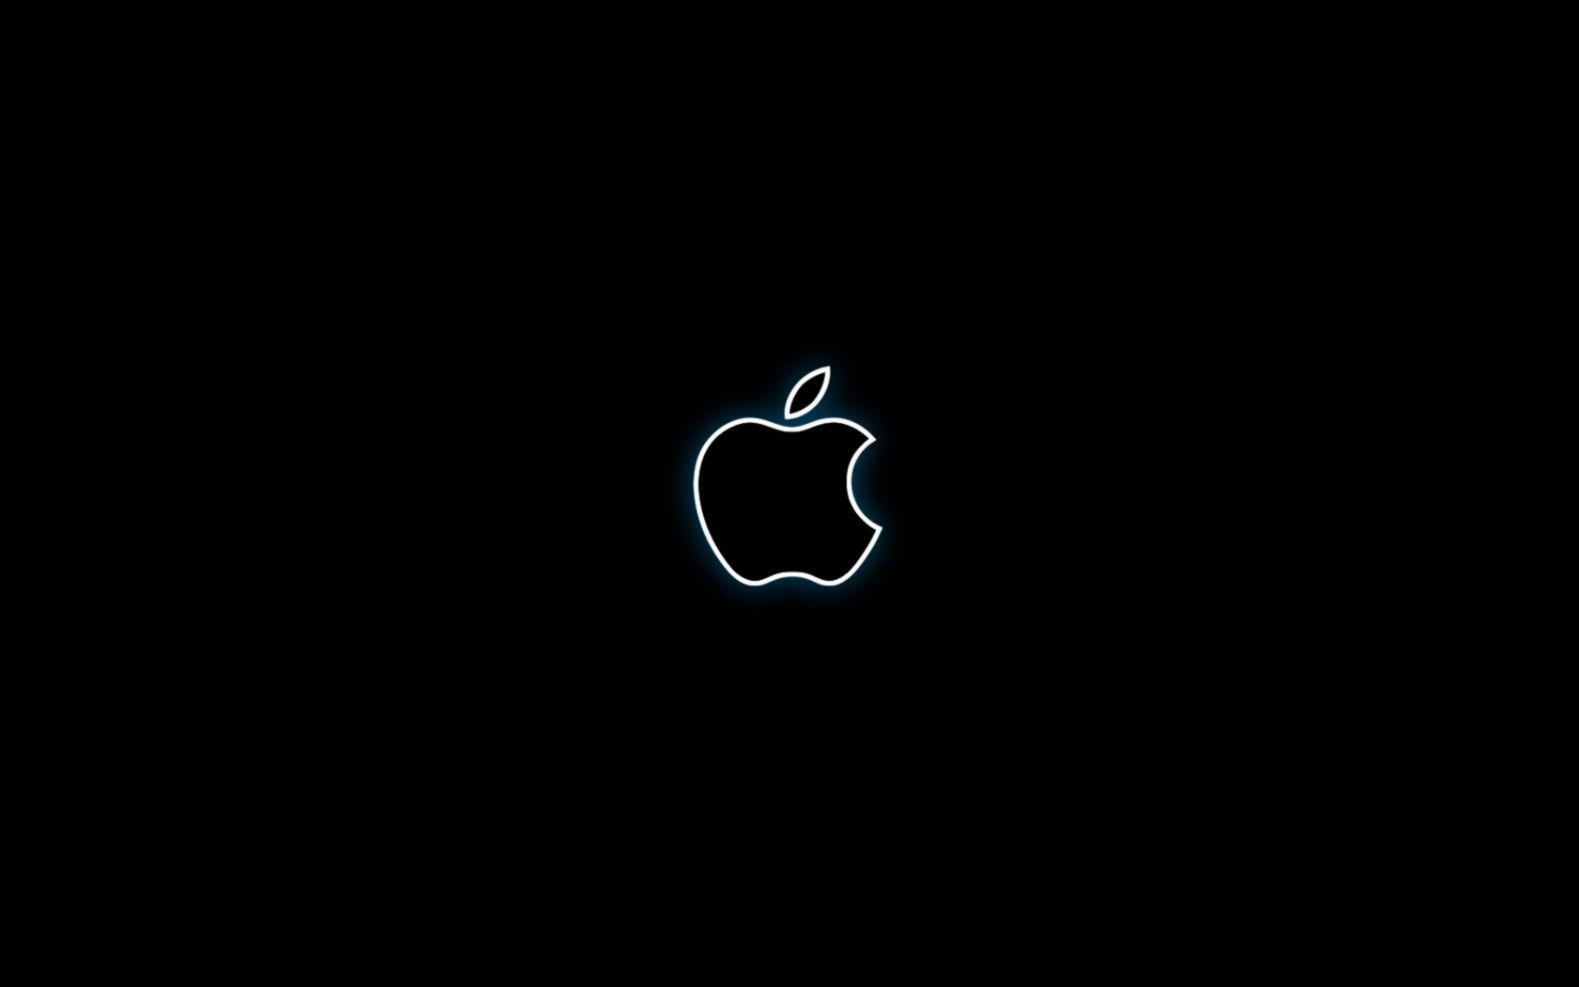 Blueand White Apple Logo - Apple Logo Hd Wallpapers Free Download | Dom Wallpapers